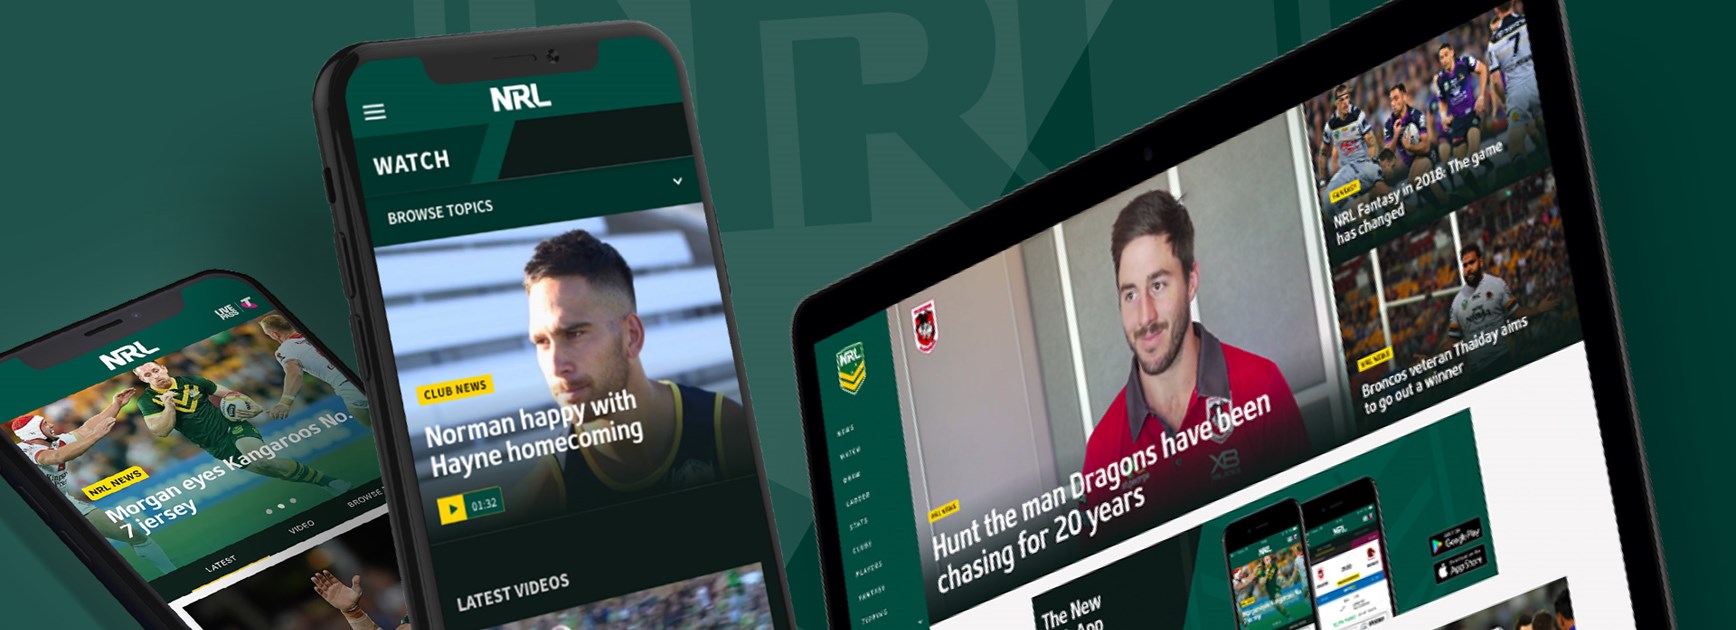 Introduction to the new NRL Digital Network